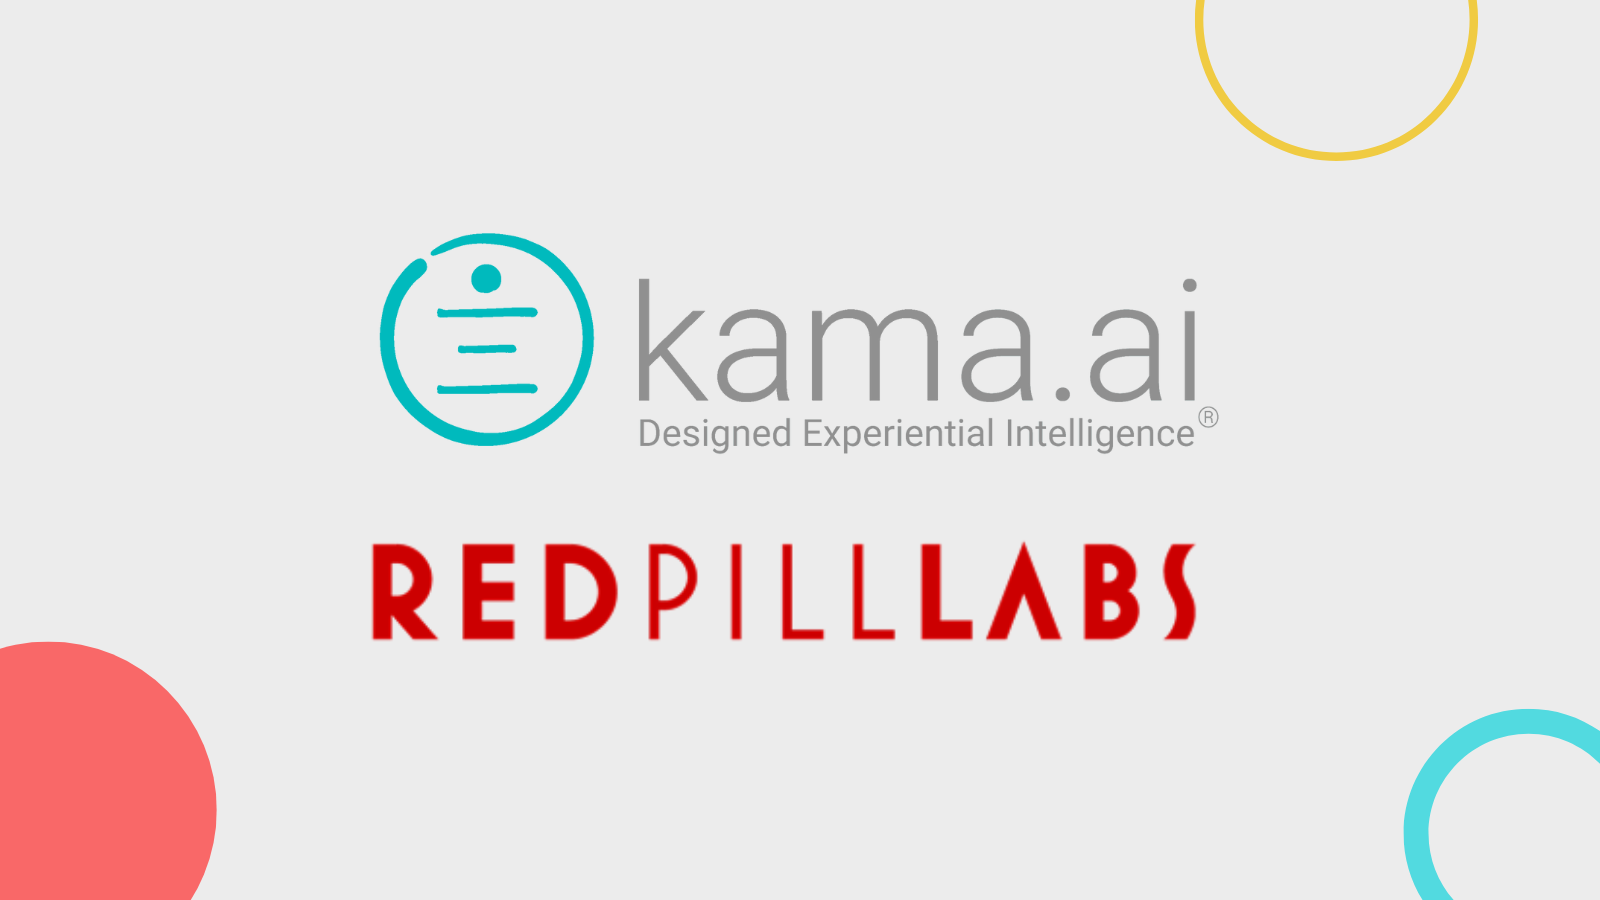 kama.ai Partners With Red Pill Labs